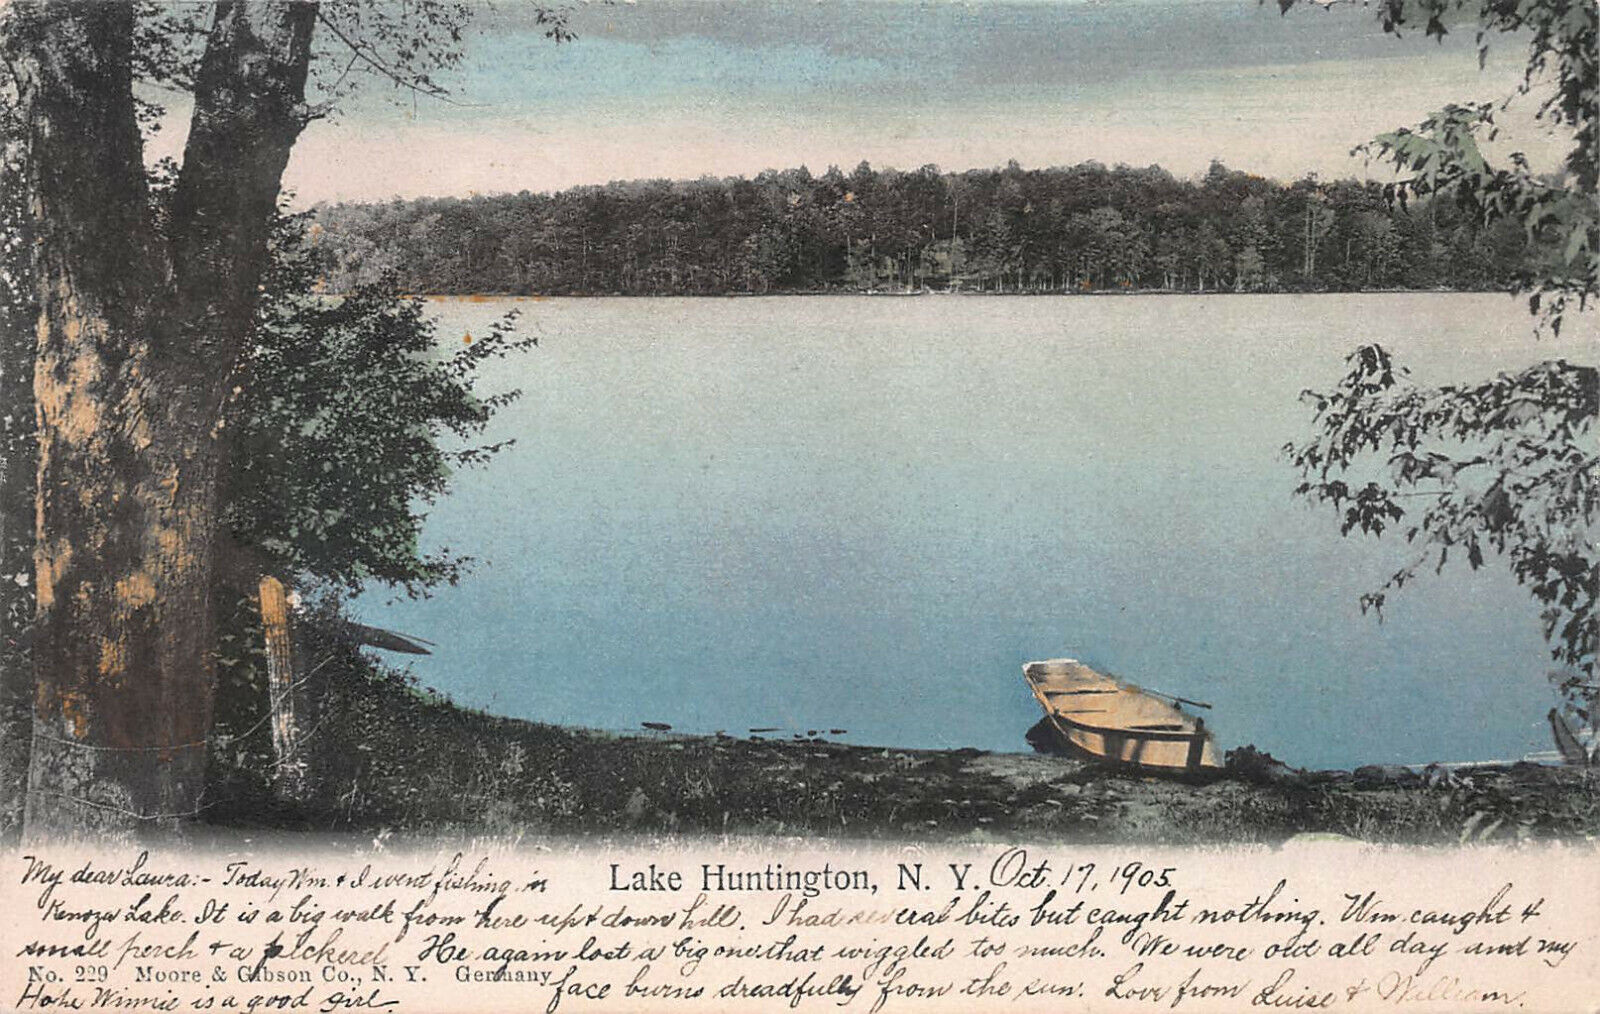 Lake Huntington, New York, Early Hand Colored Postcard, Used in 1905